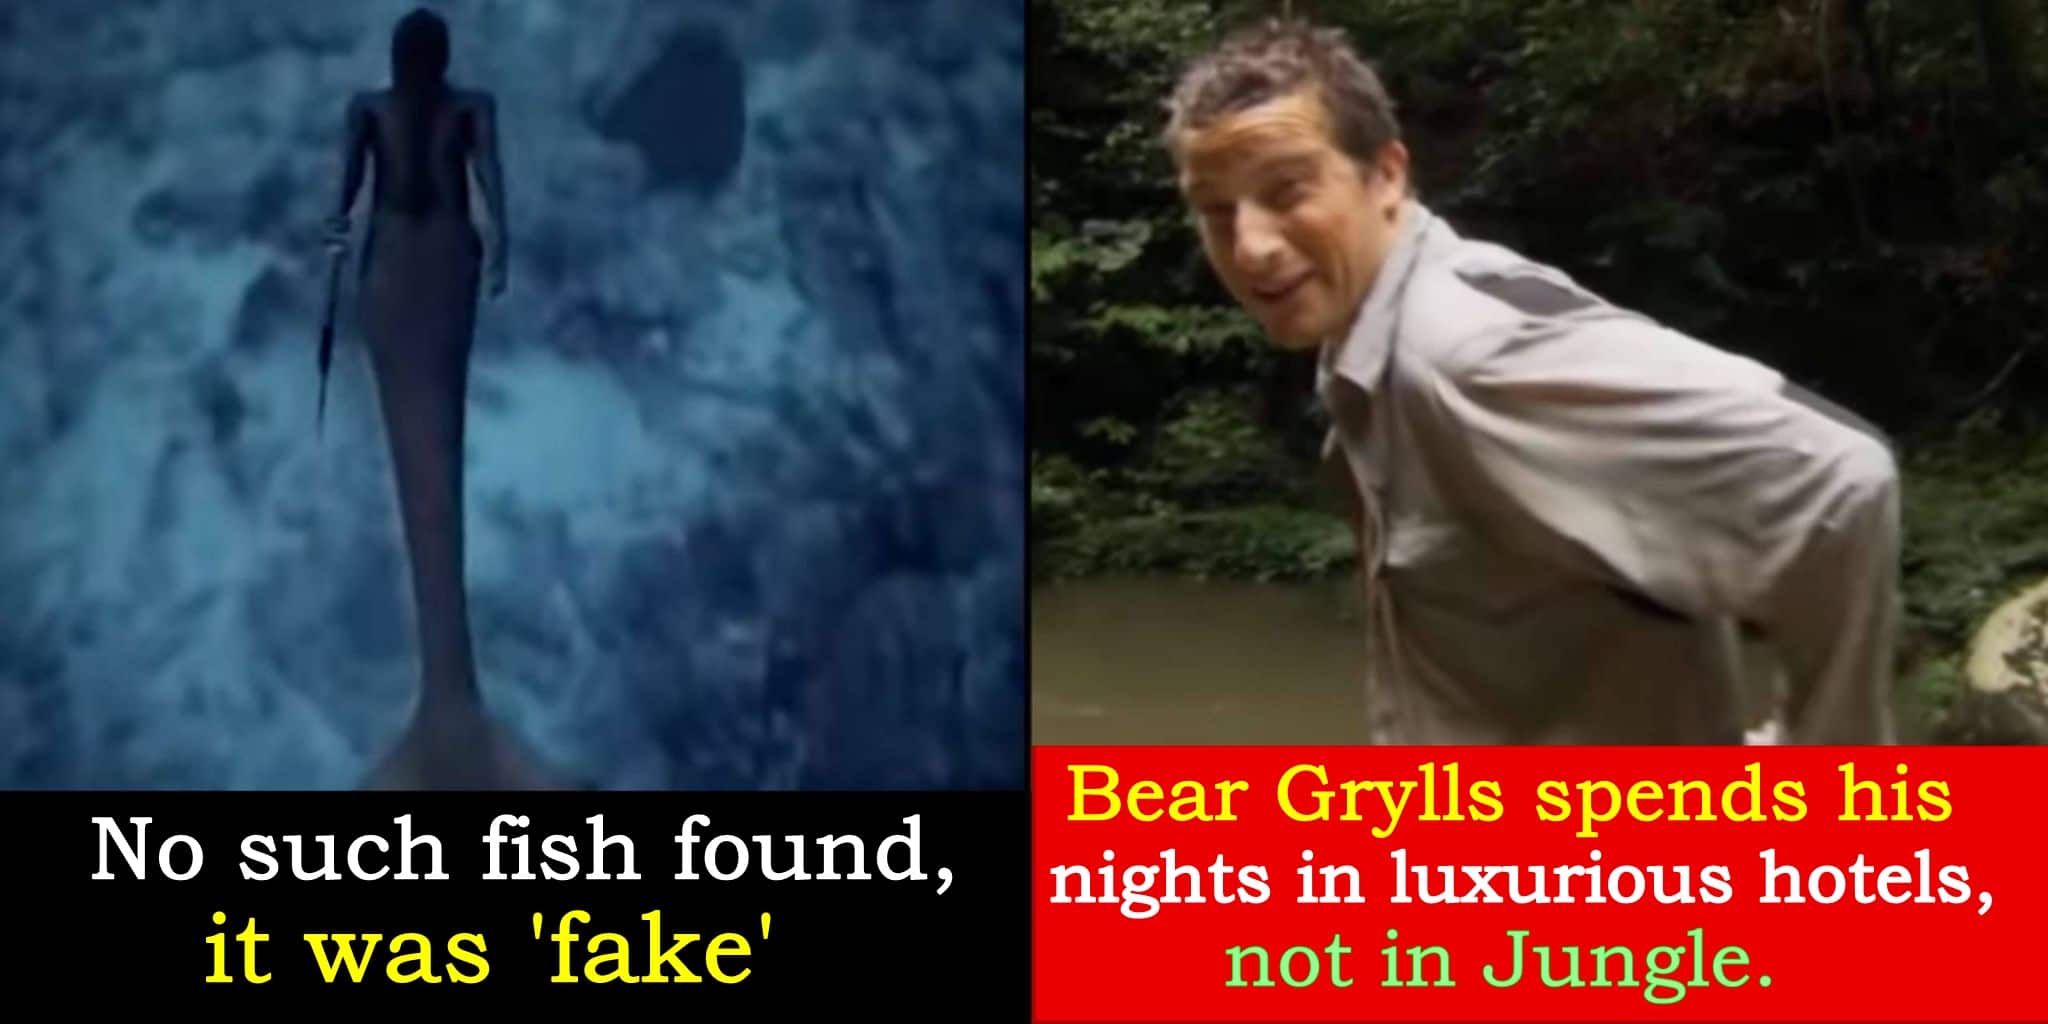 Ten times the discovery channel has lied to us, details inside